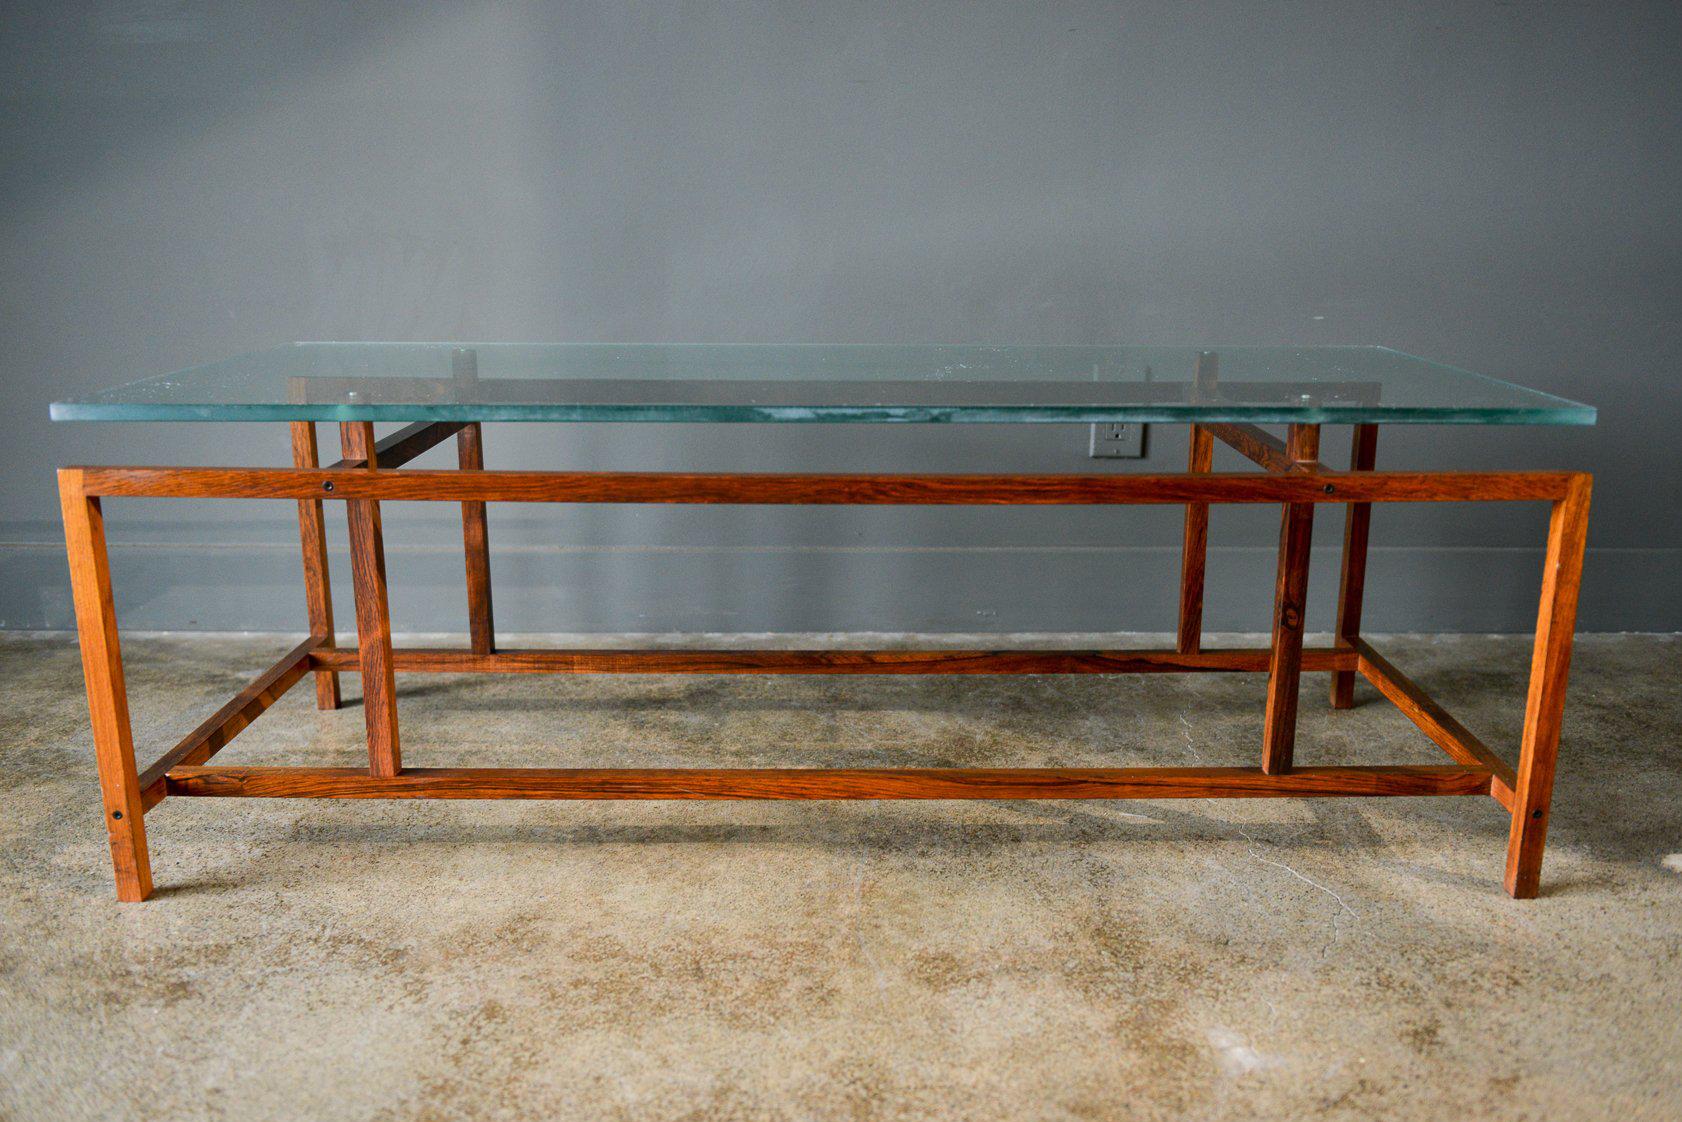 Rosewood and glass coffee table by Henning Norgaard for Komfort of Denmark, circa 1965. Original notched glass with very light wear, one small mark as shown in photos. Rosewood frames in very good condition. 

Measures 47